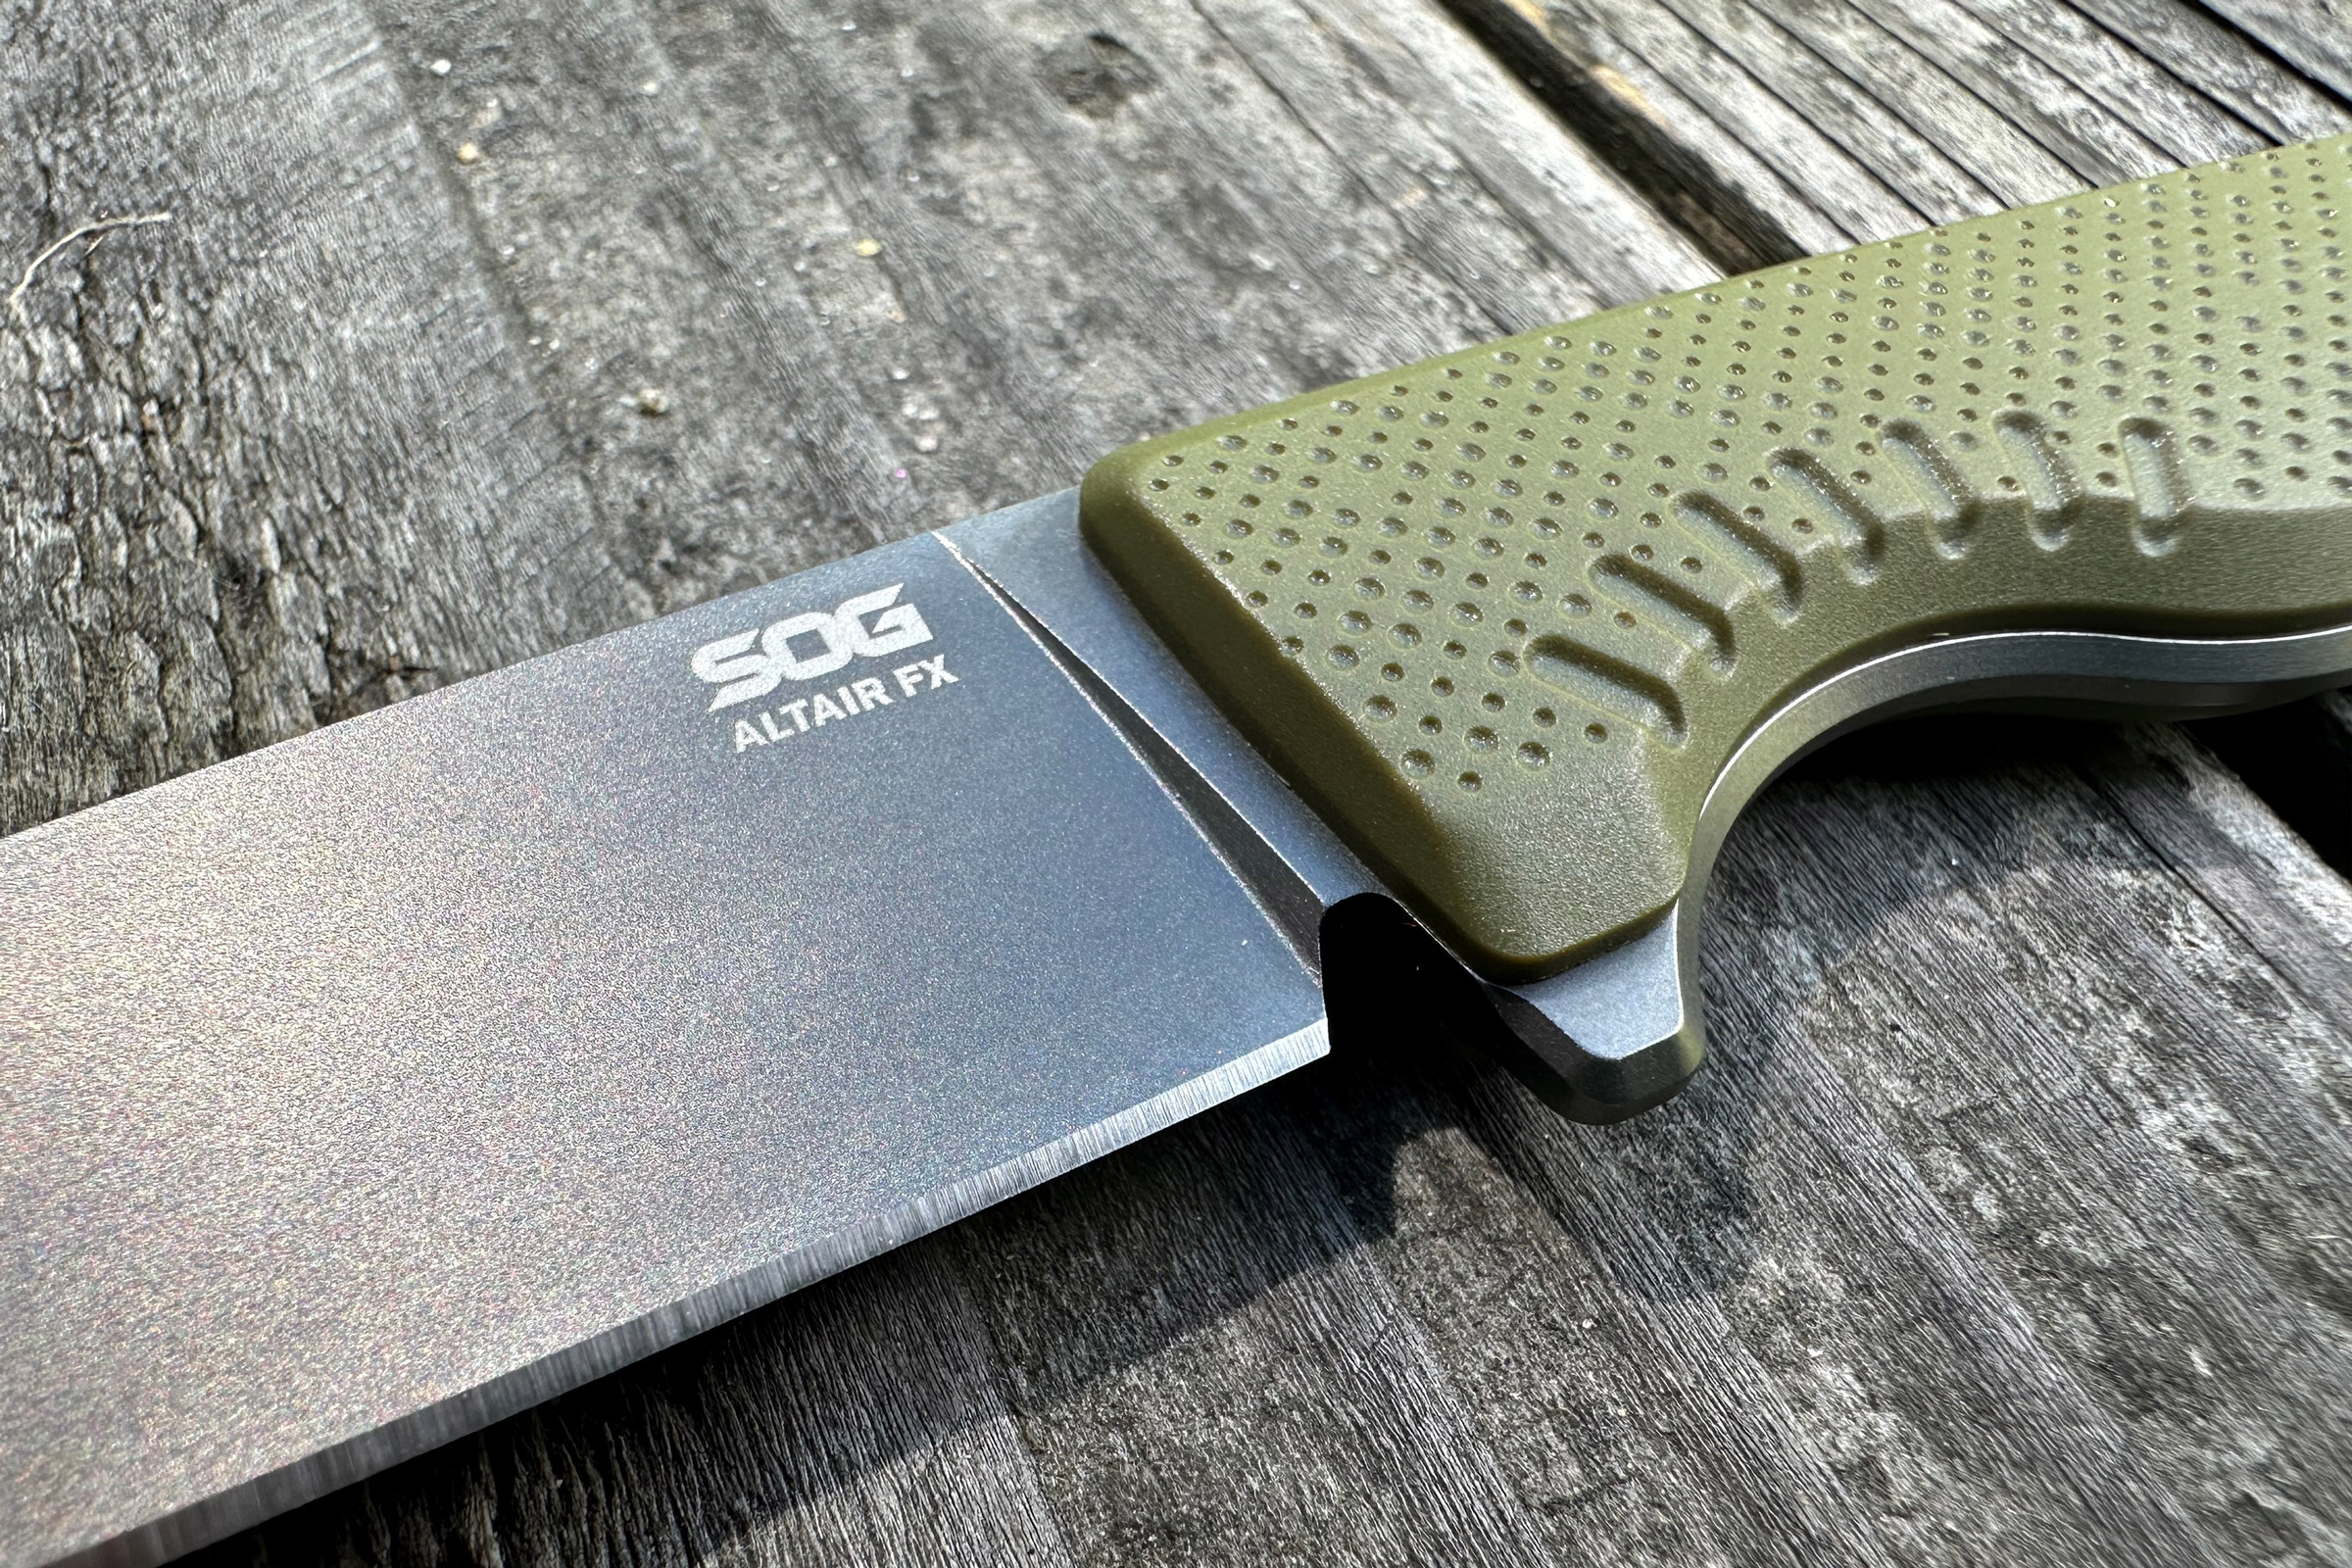 ‘Minimalist’ Knife, Maximal Utility: SOG Altair FX Review